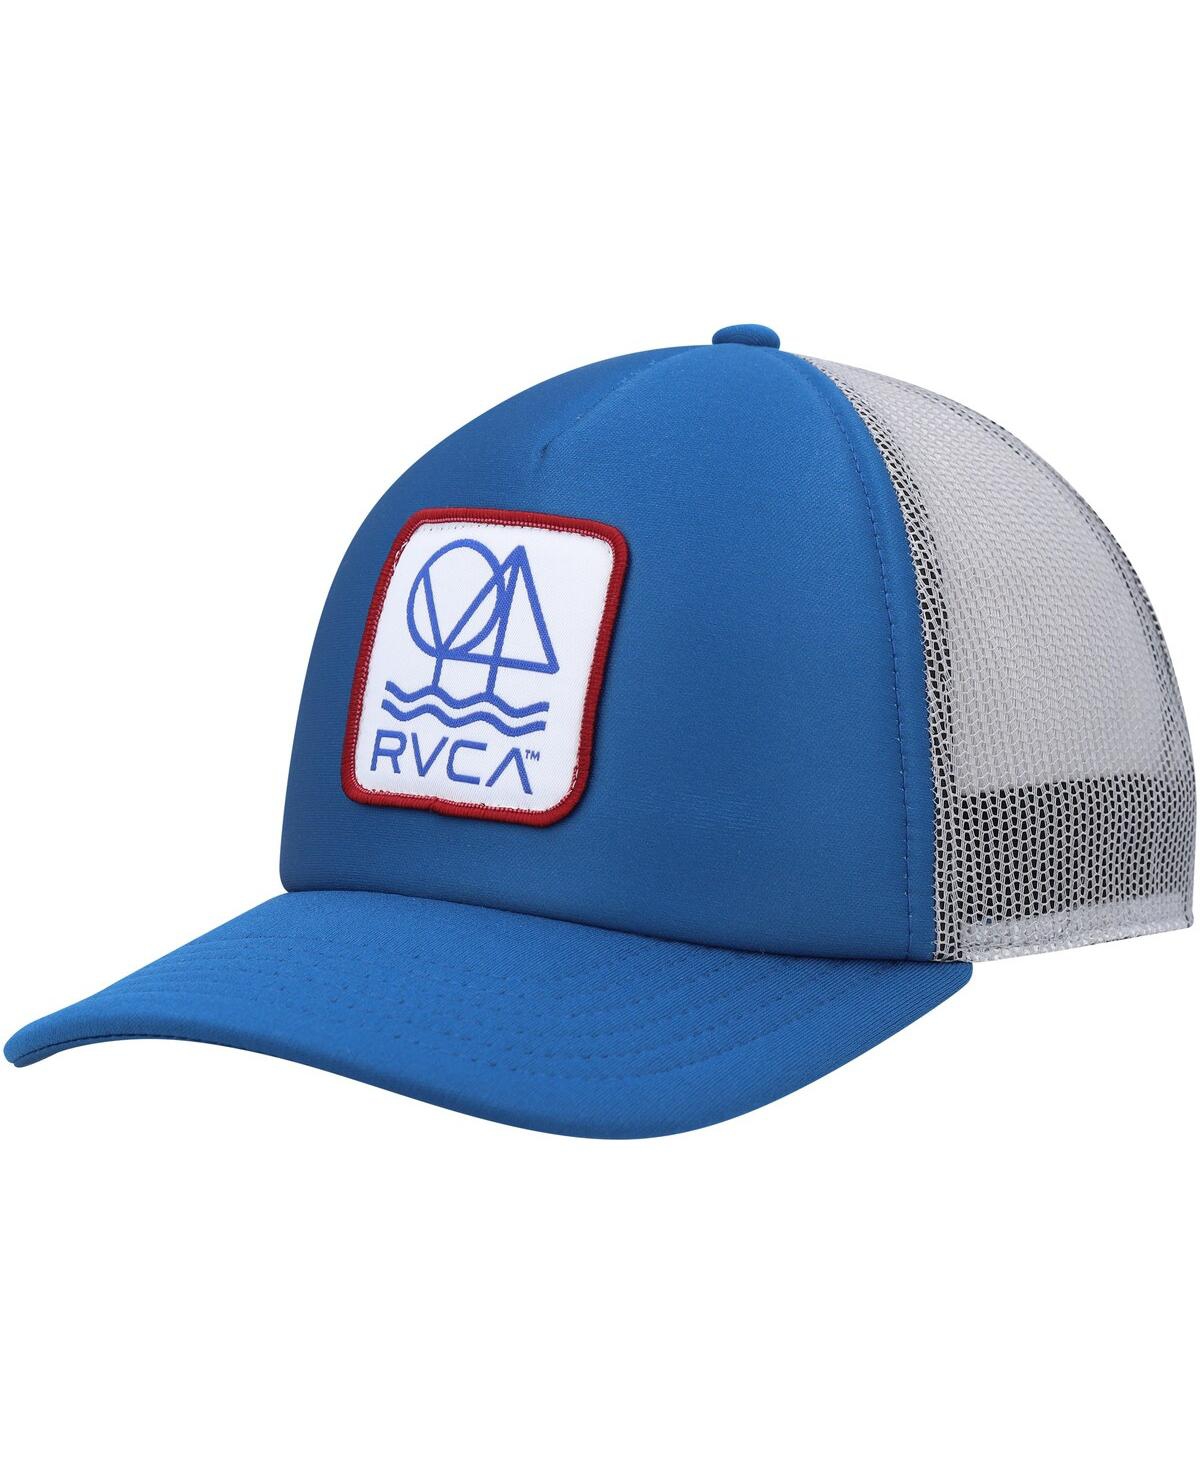 Rvca Men's  Blue And Gray Timber Trucker Snapback Hat In Blue,gray